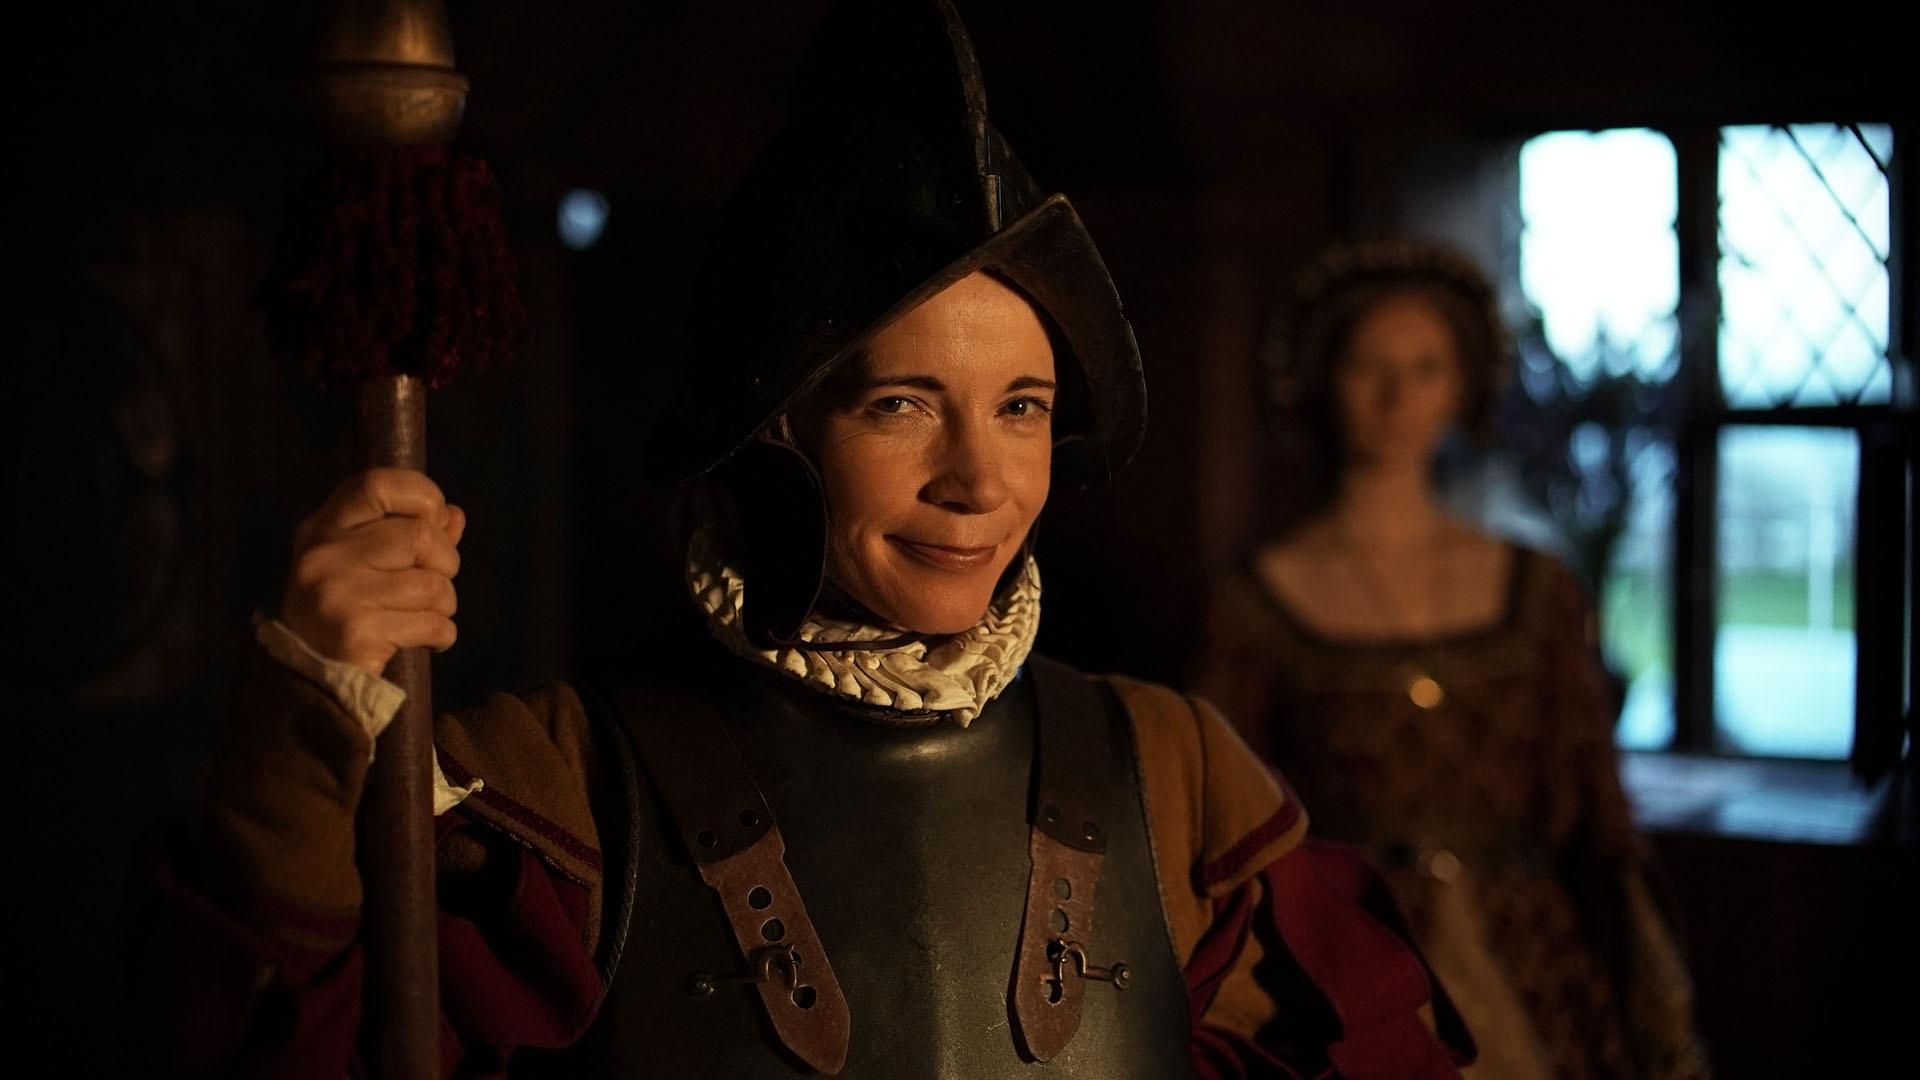 Lucy Worsley dressed as a guard with Anne Boleyn in the background.